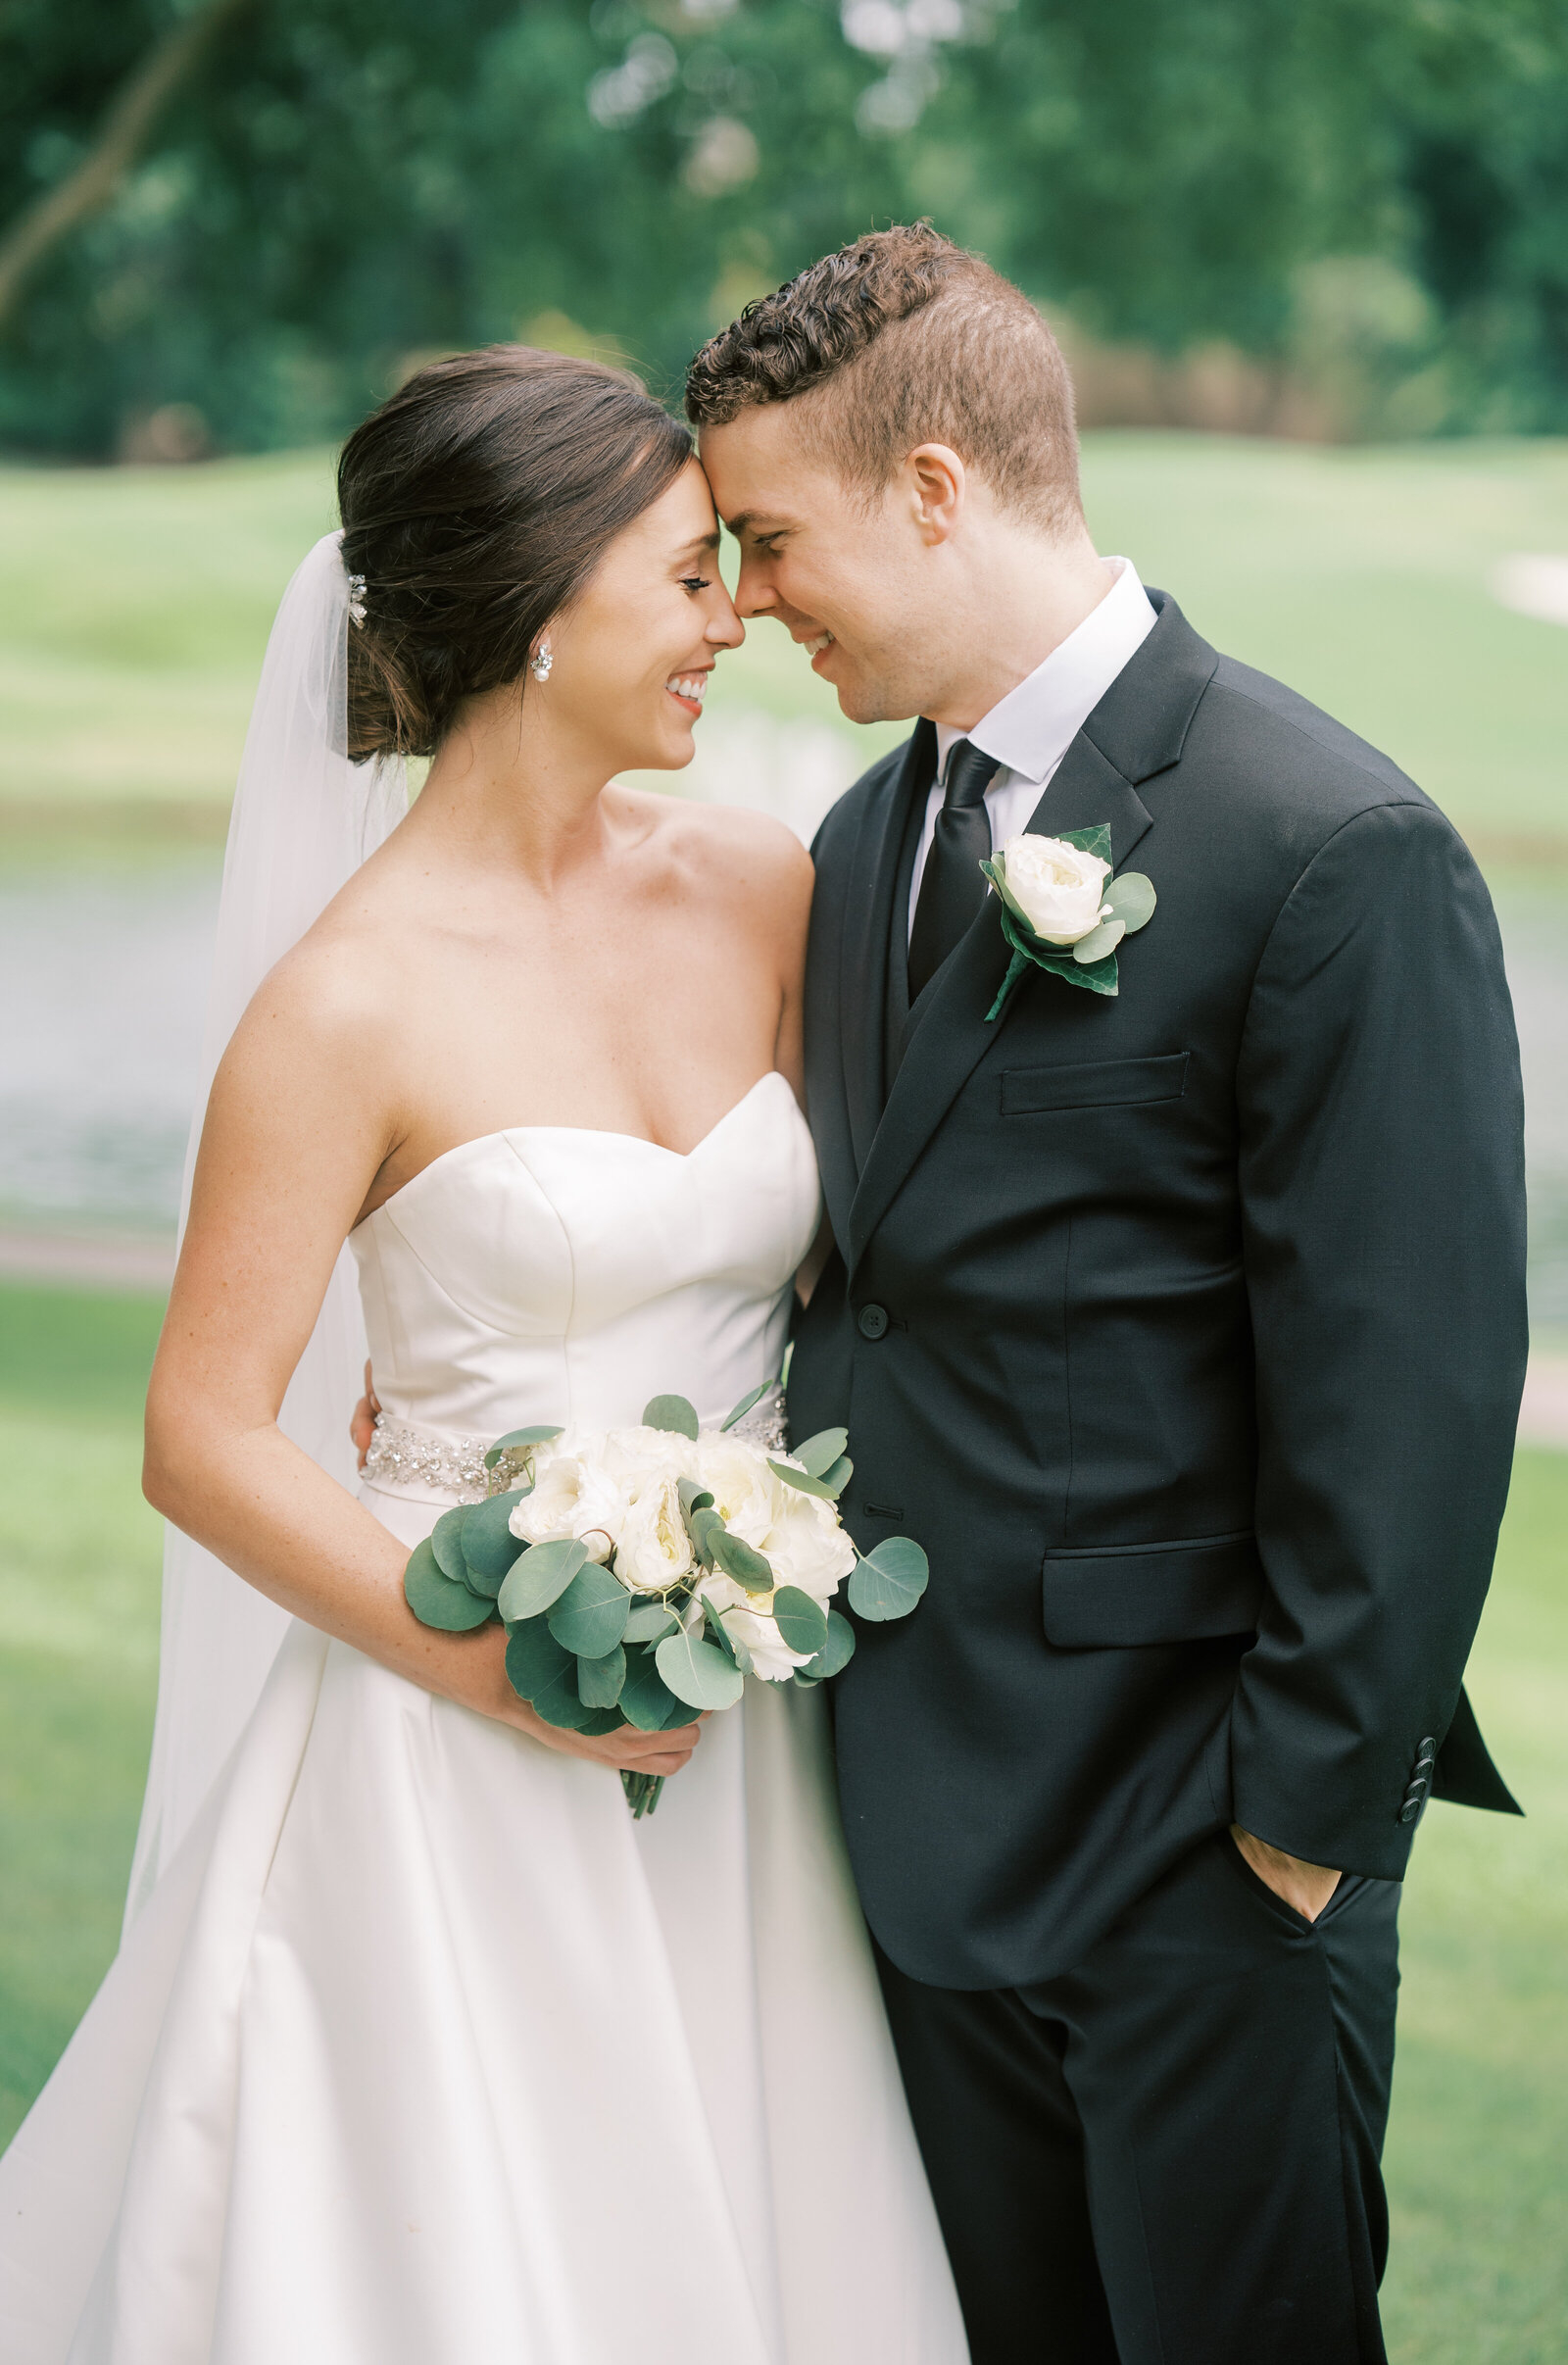 Portrait of bride and groom in a white wedding gown and black tuxedo on a green field.